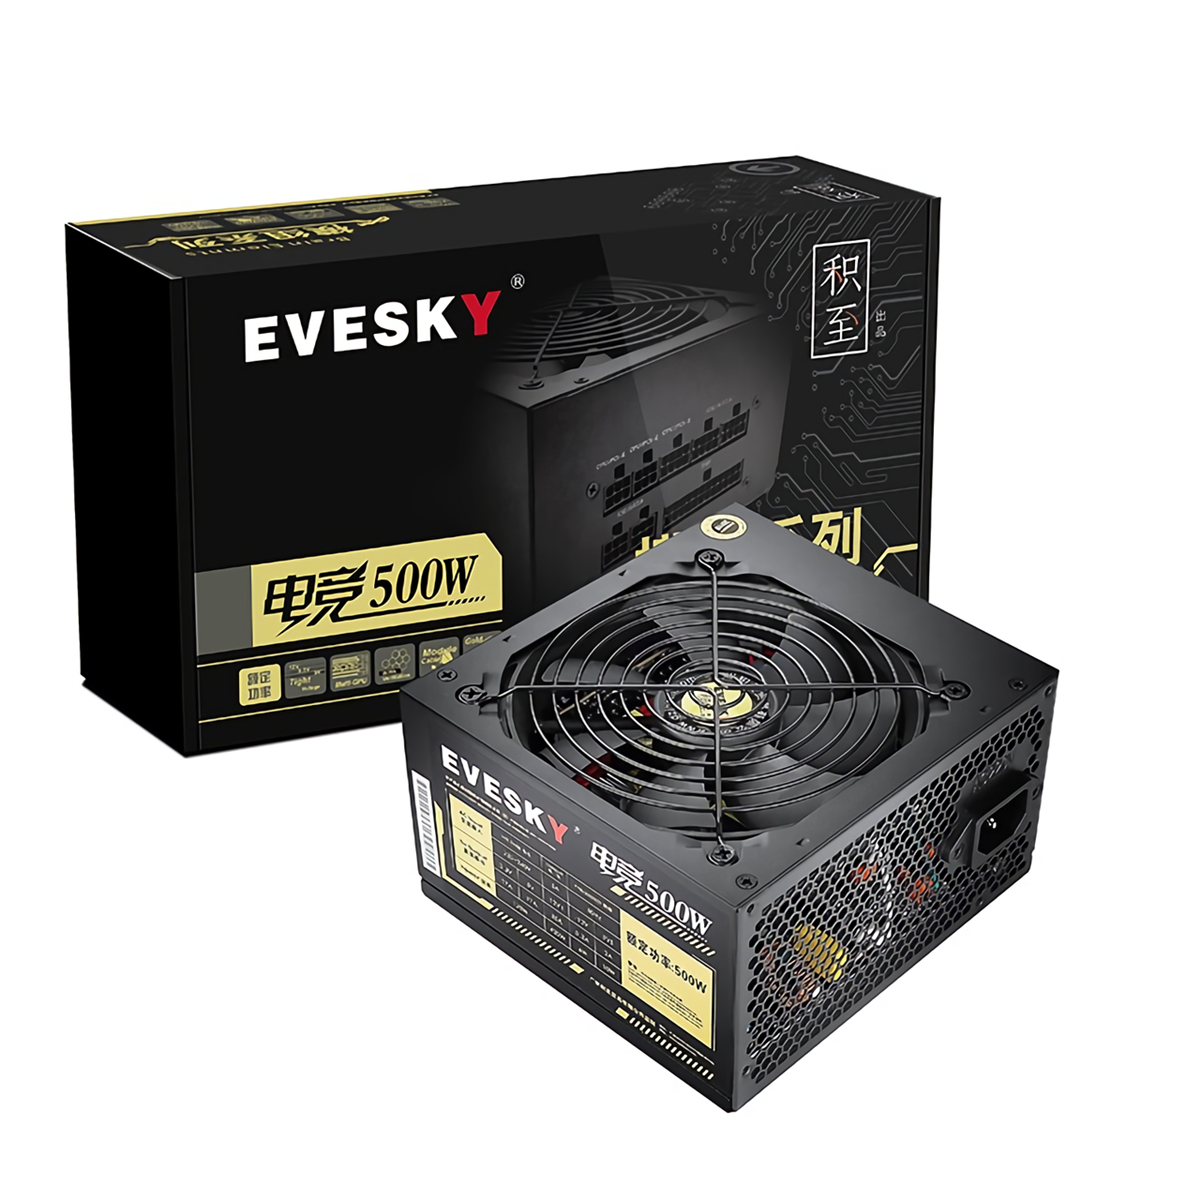 EVESKY-500W-Desktop-Computer-Mainframe-Power-Supply-Wide-Mute-Power-Supply-12CM-Rated-500W-Peak-Non--1841201-11